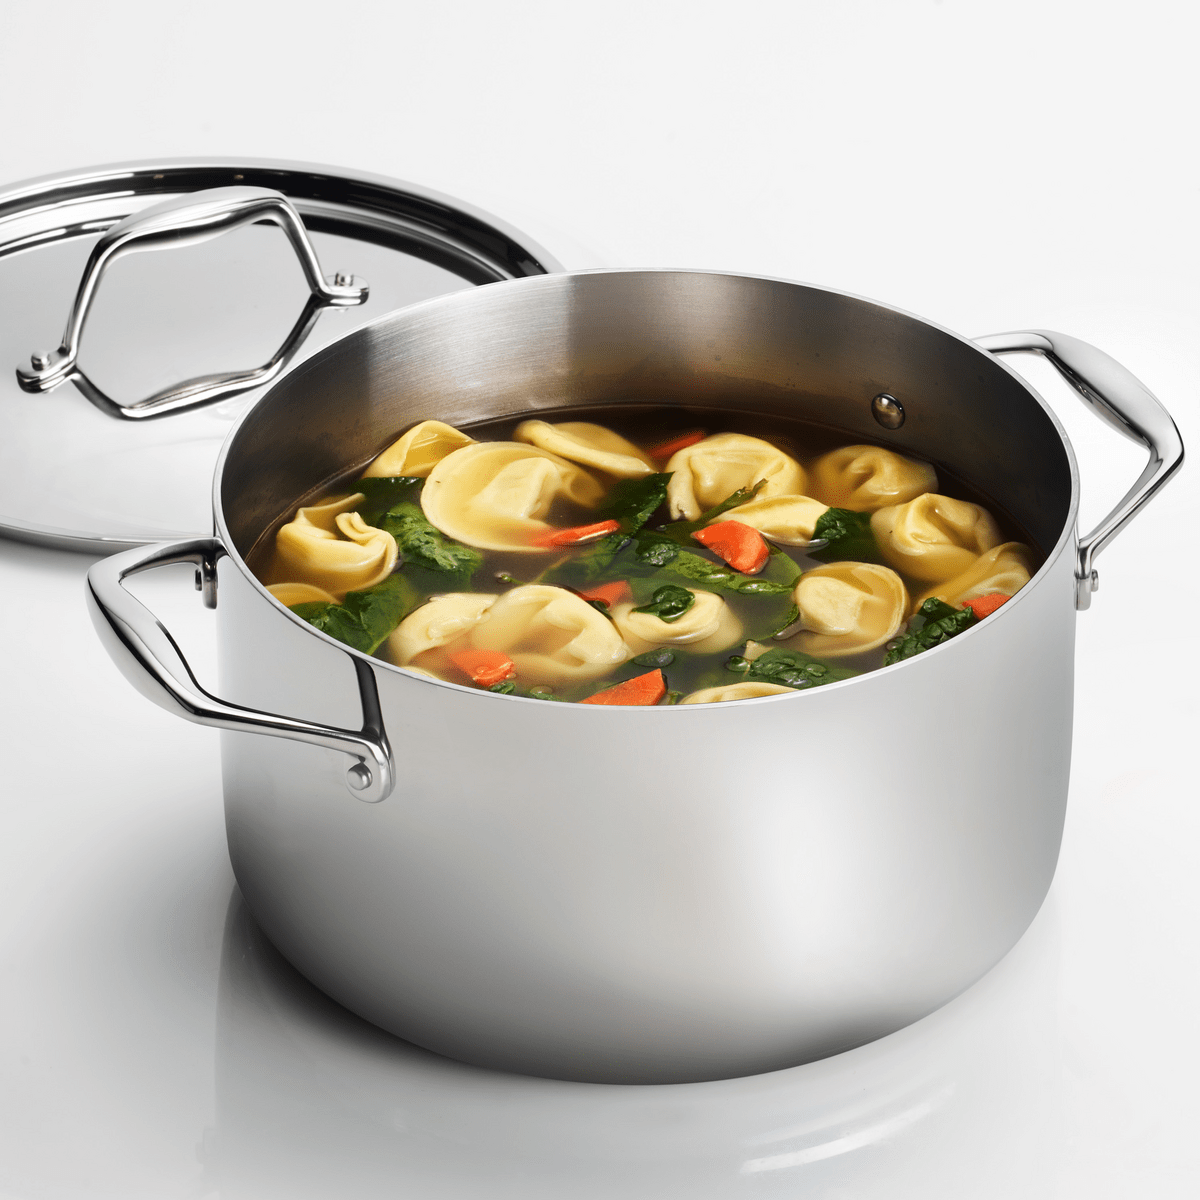 Tramontina Tri-Ply Clad Premium Stainless Steel 8 Quart Covered Stock Pot  NEW